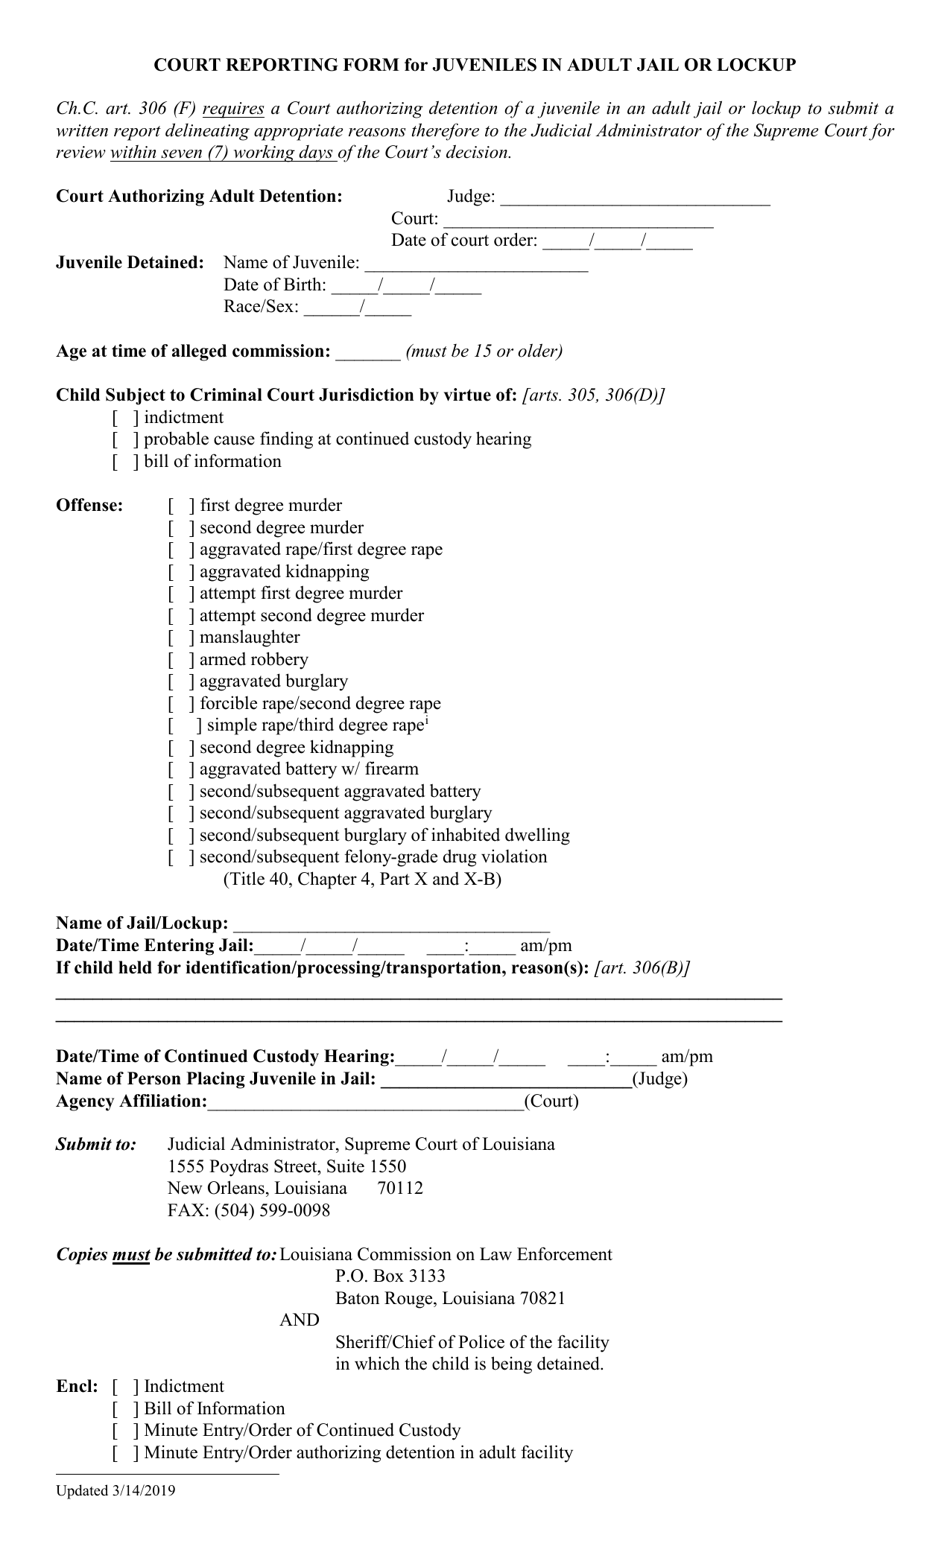 Court Reporting Form for Juveniles in Adult Jail or Lockup - Louisiana, Page 1